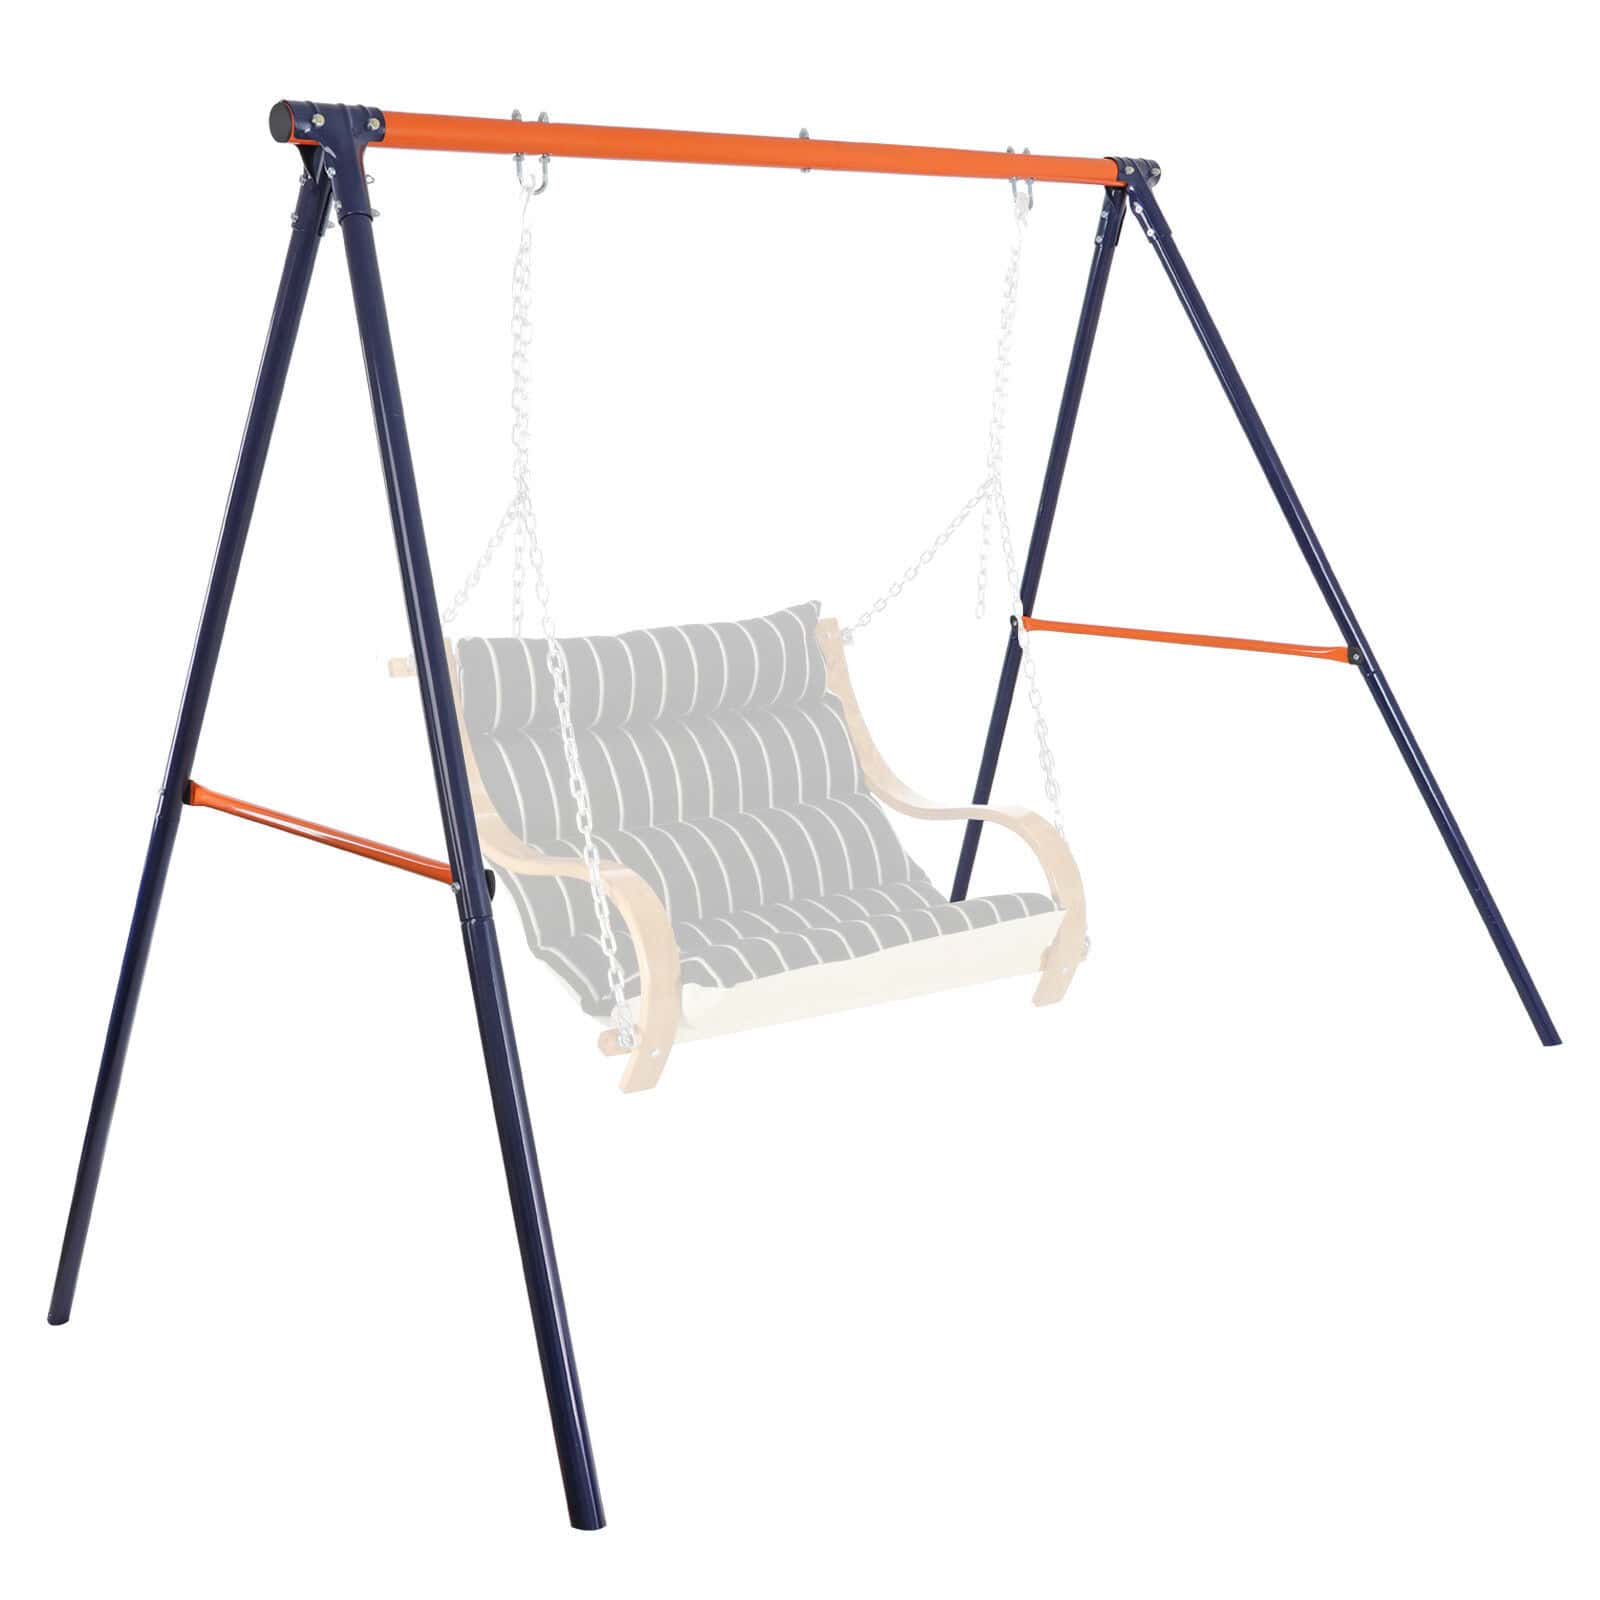 A swing set with a chair on it.